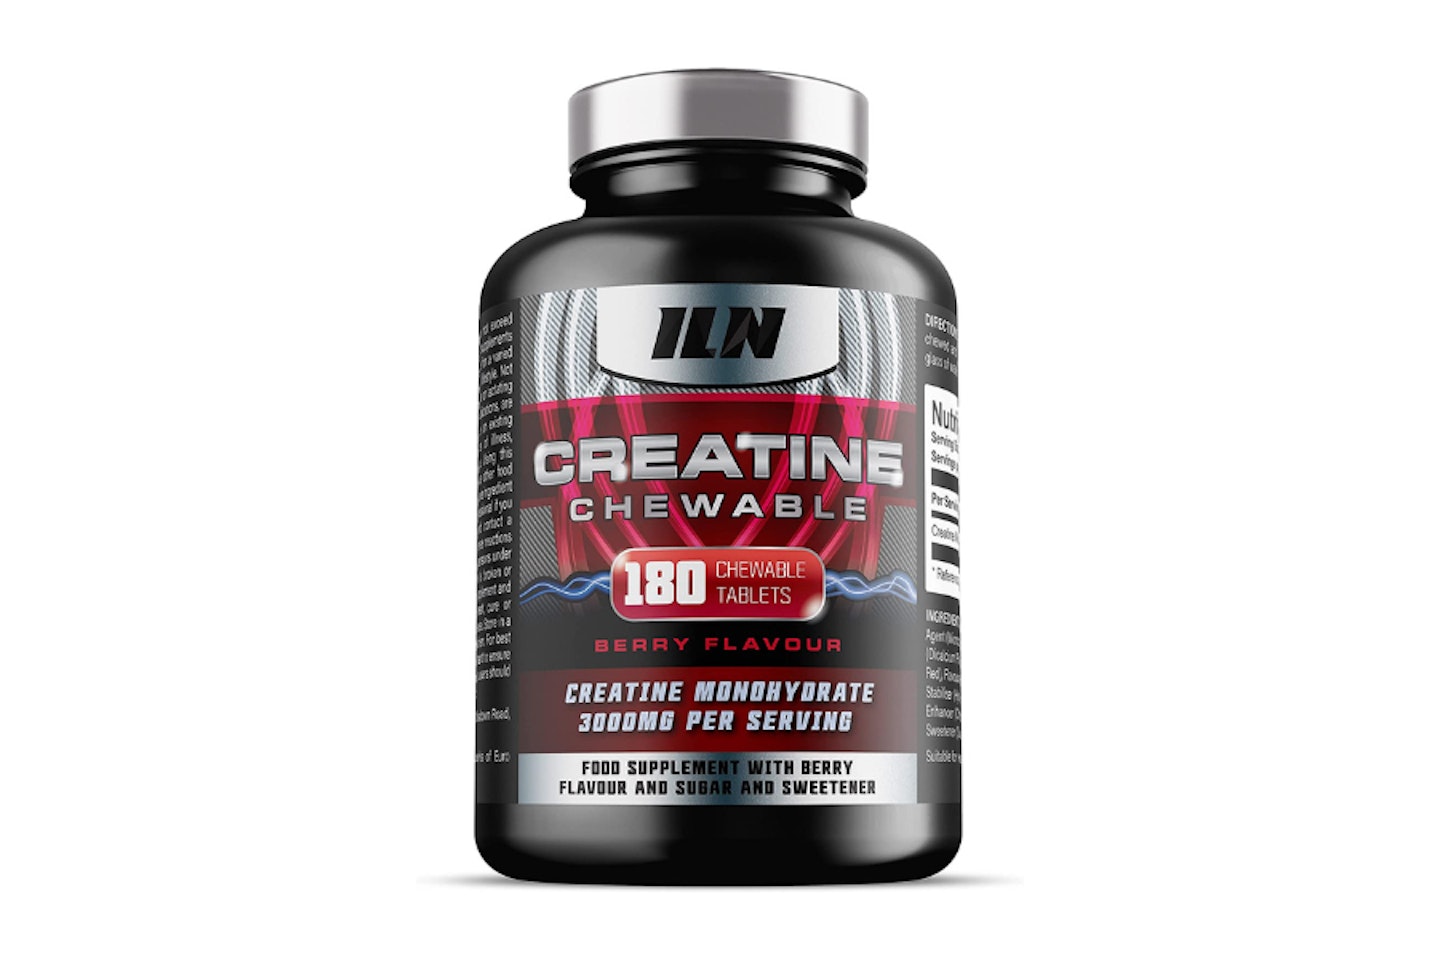 Chewable Creatine Tablets (Berry Flavour)